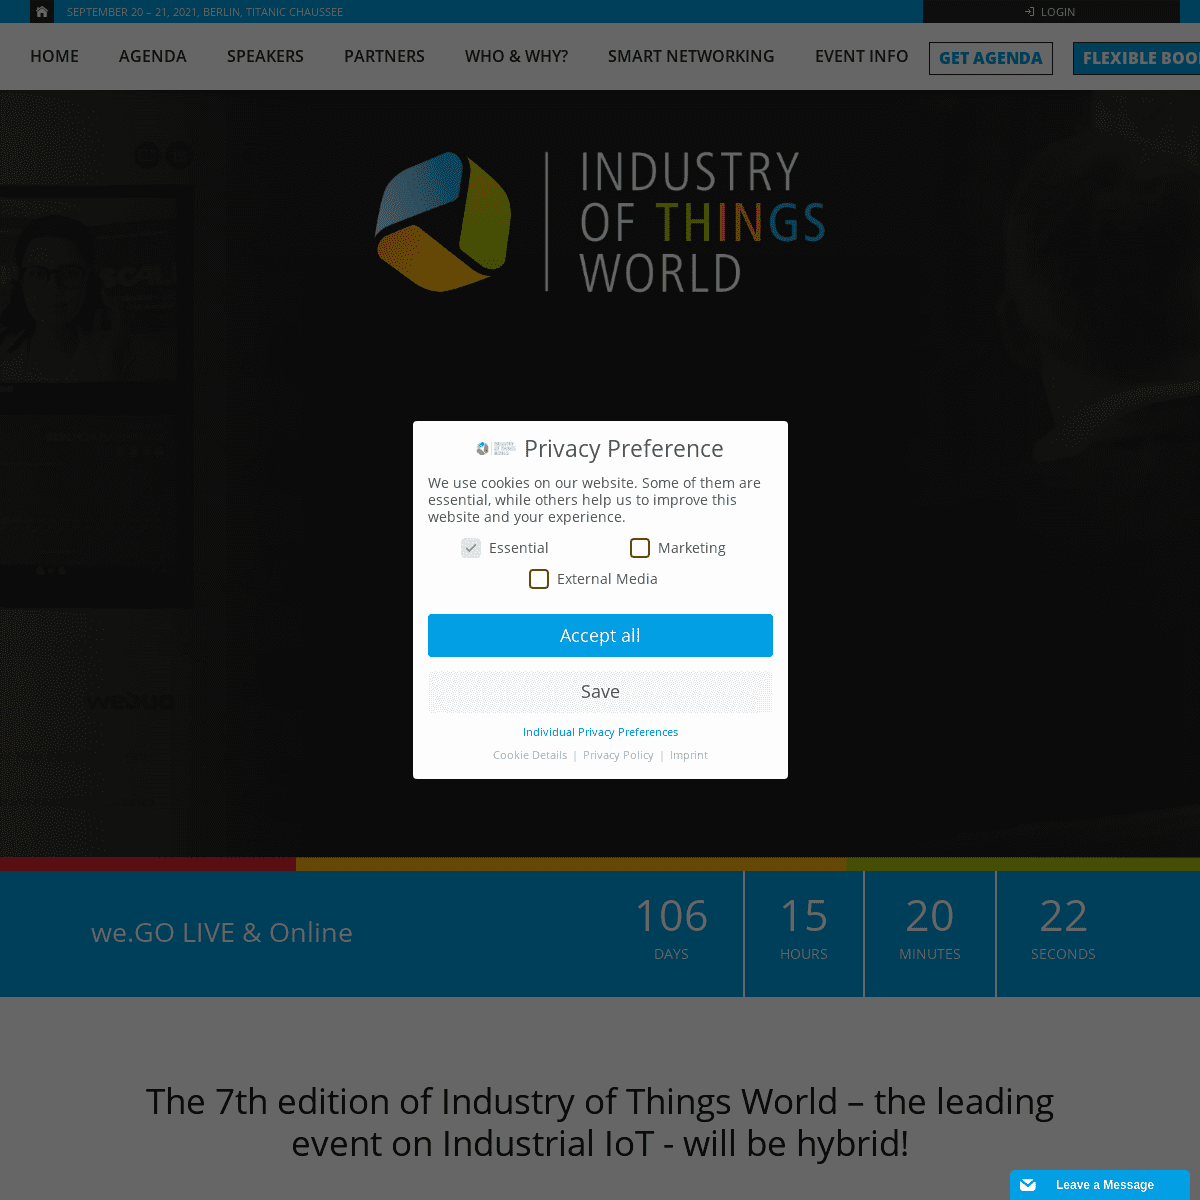 A complete backup of https://industryofthingsworld.com